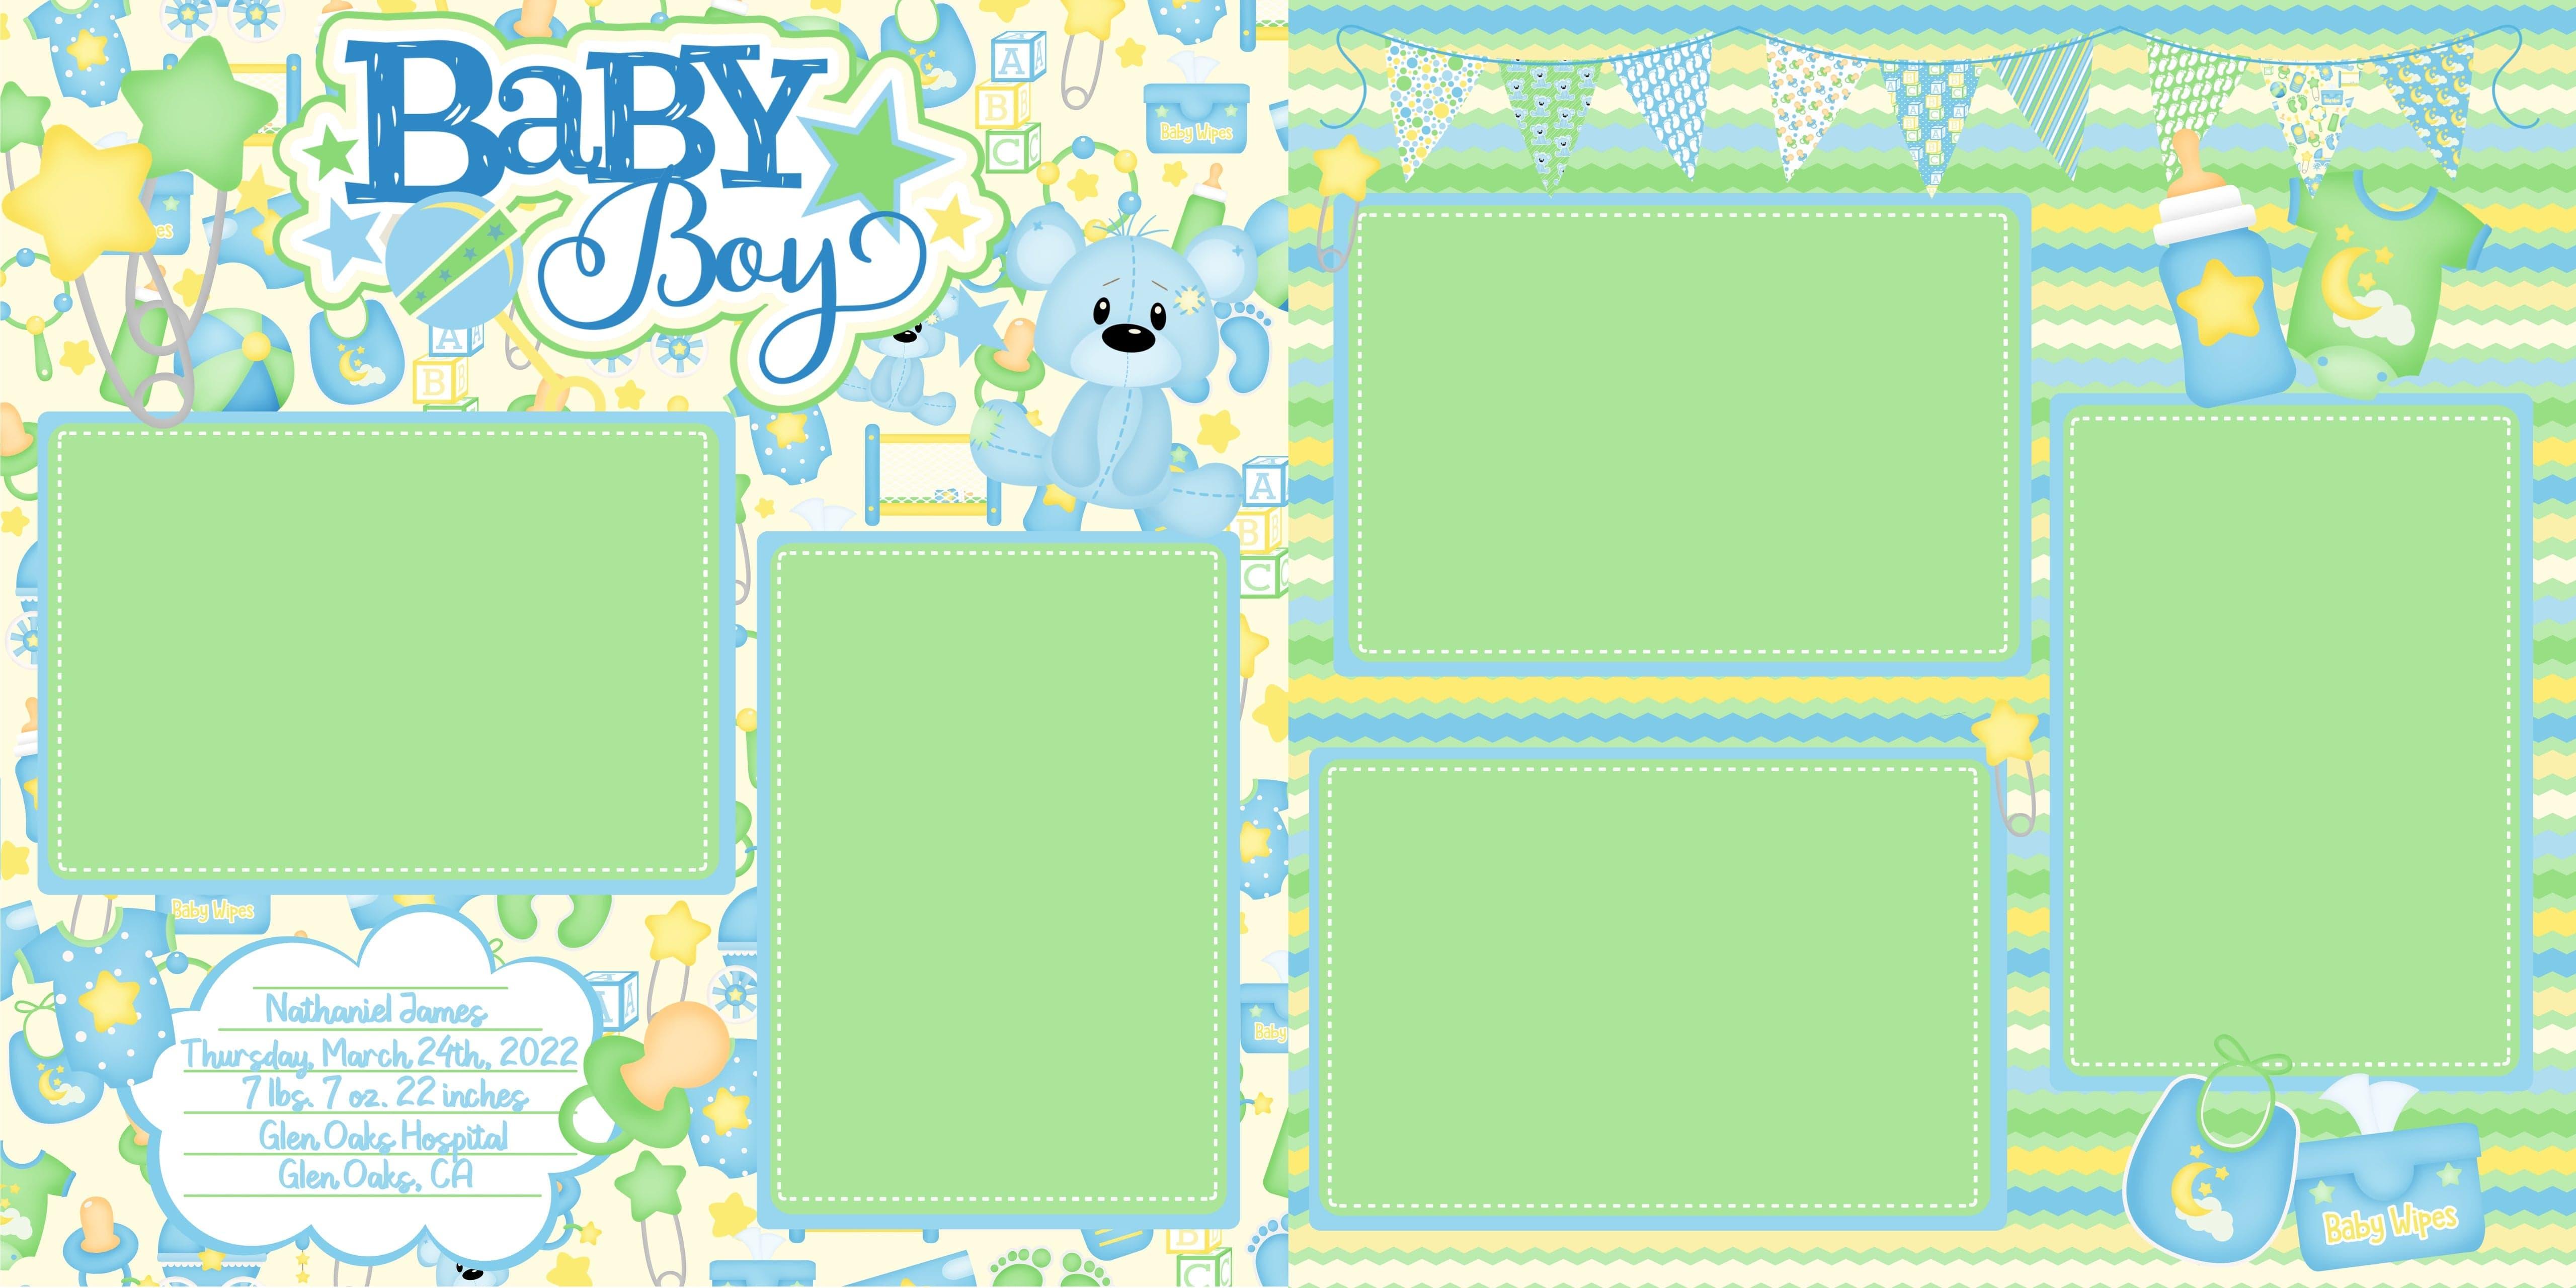 It's A Boy Collection **Custom** Baby Boy (2) - 12 x 12 Premade, Printed Scrapbook Pages by SSC Designs